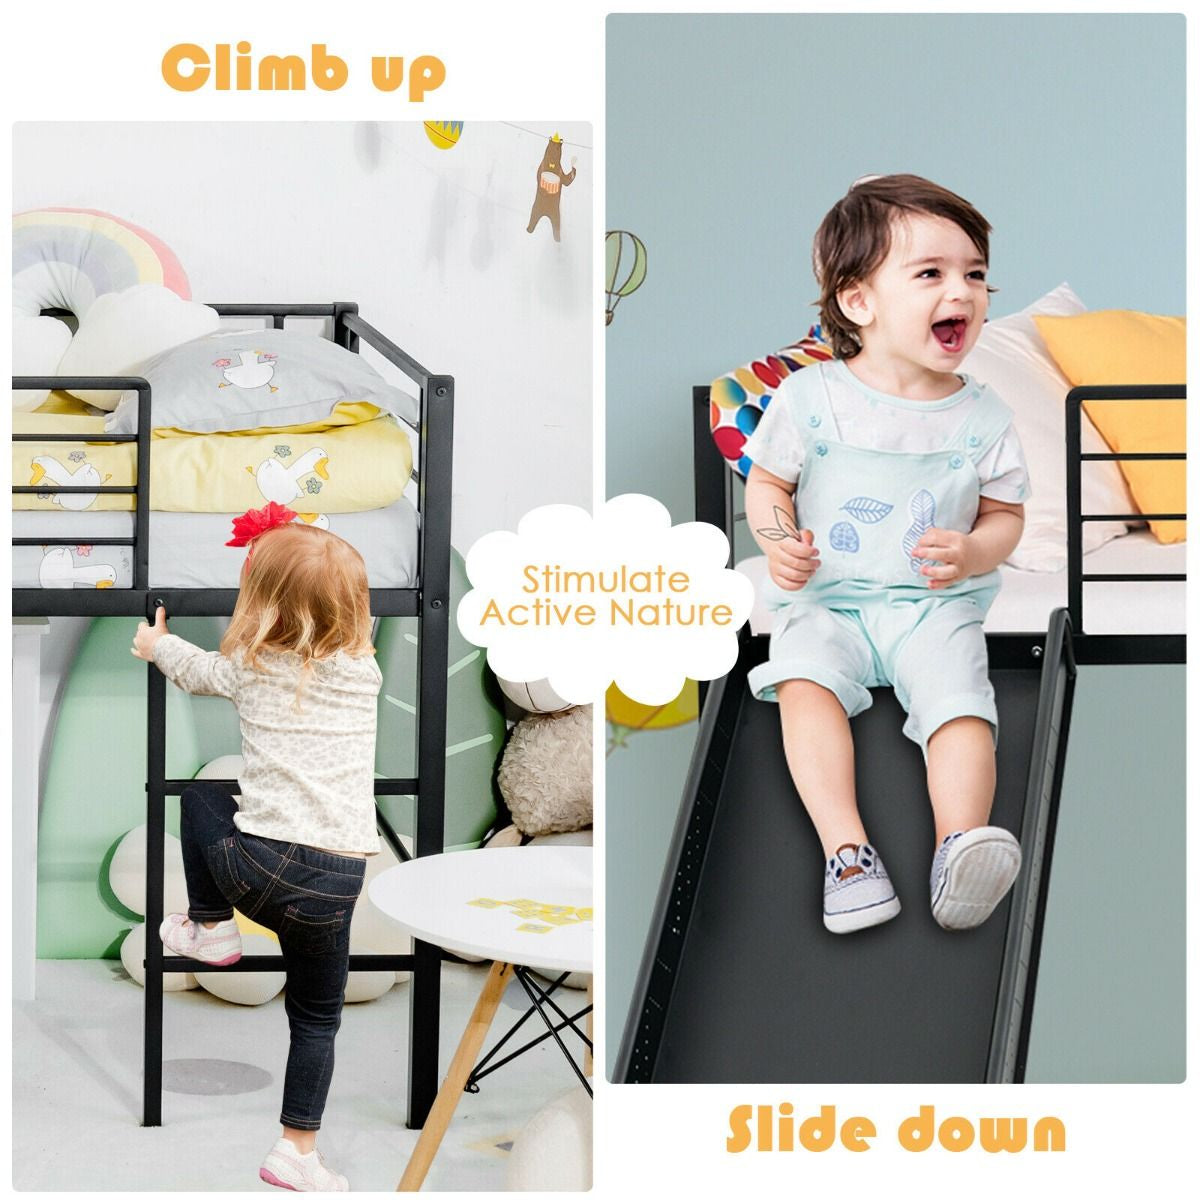 Sliding Loft Children Single Bed with Stairs and Safety Guardrails